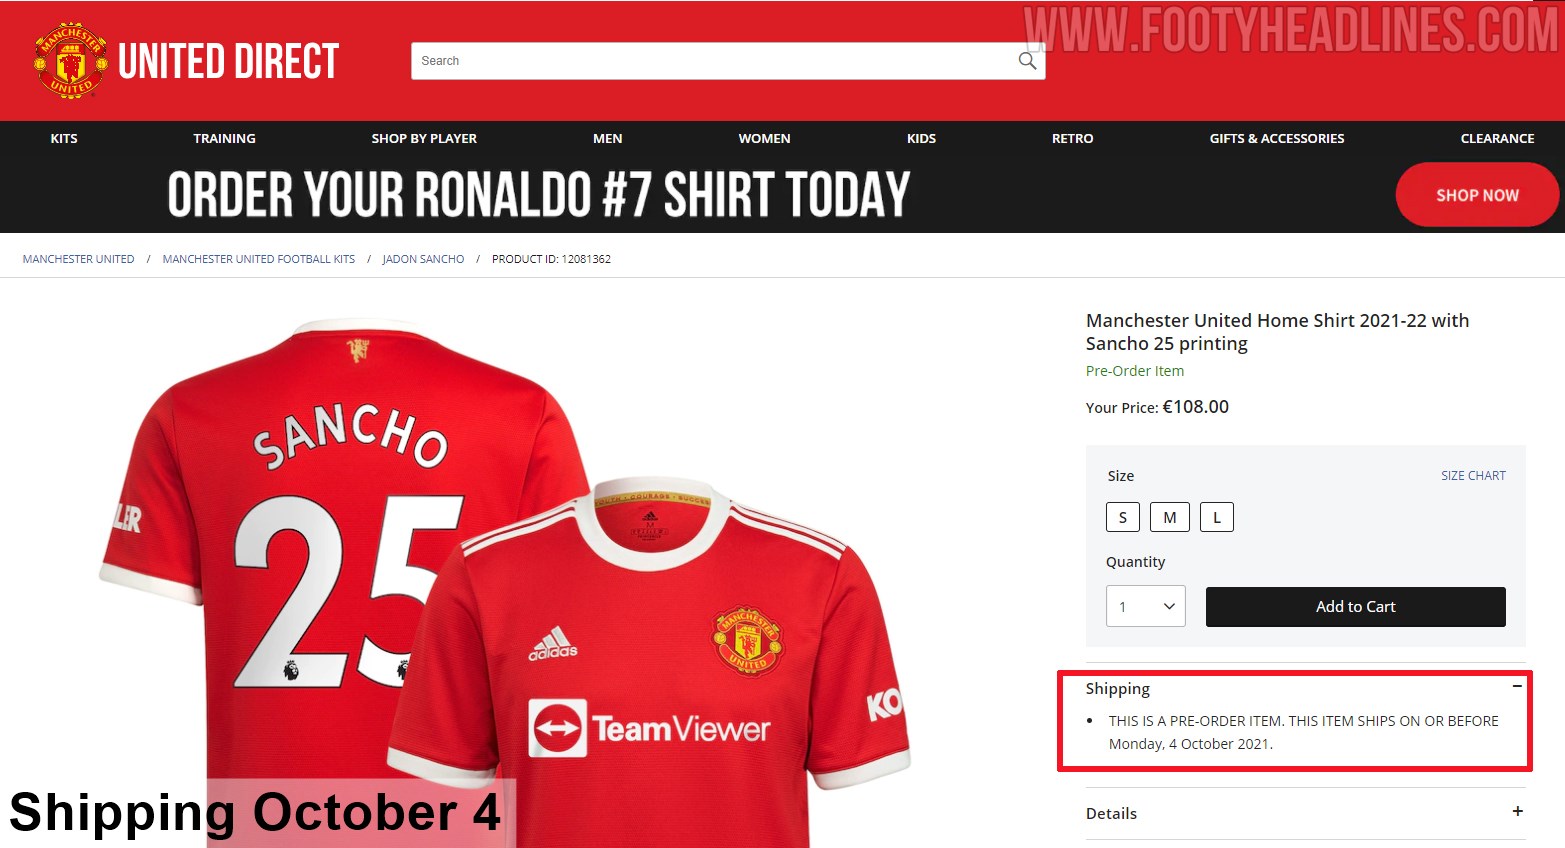 Manchester United Are Running Out of Ronaldo 7 Kit Prints